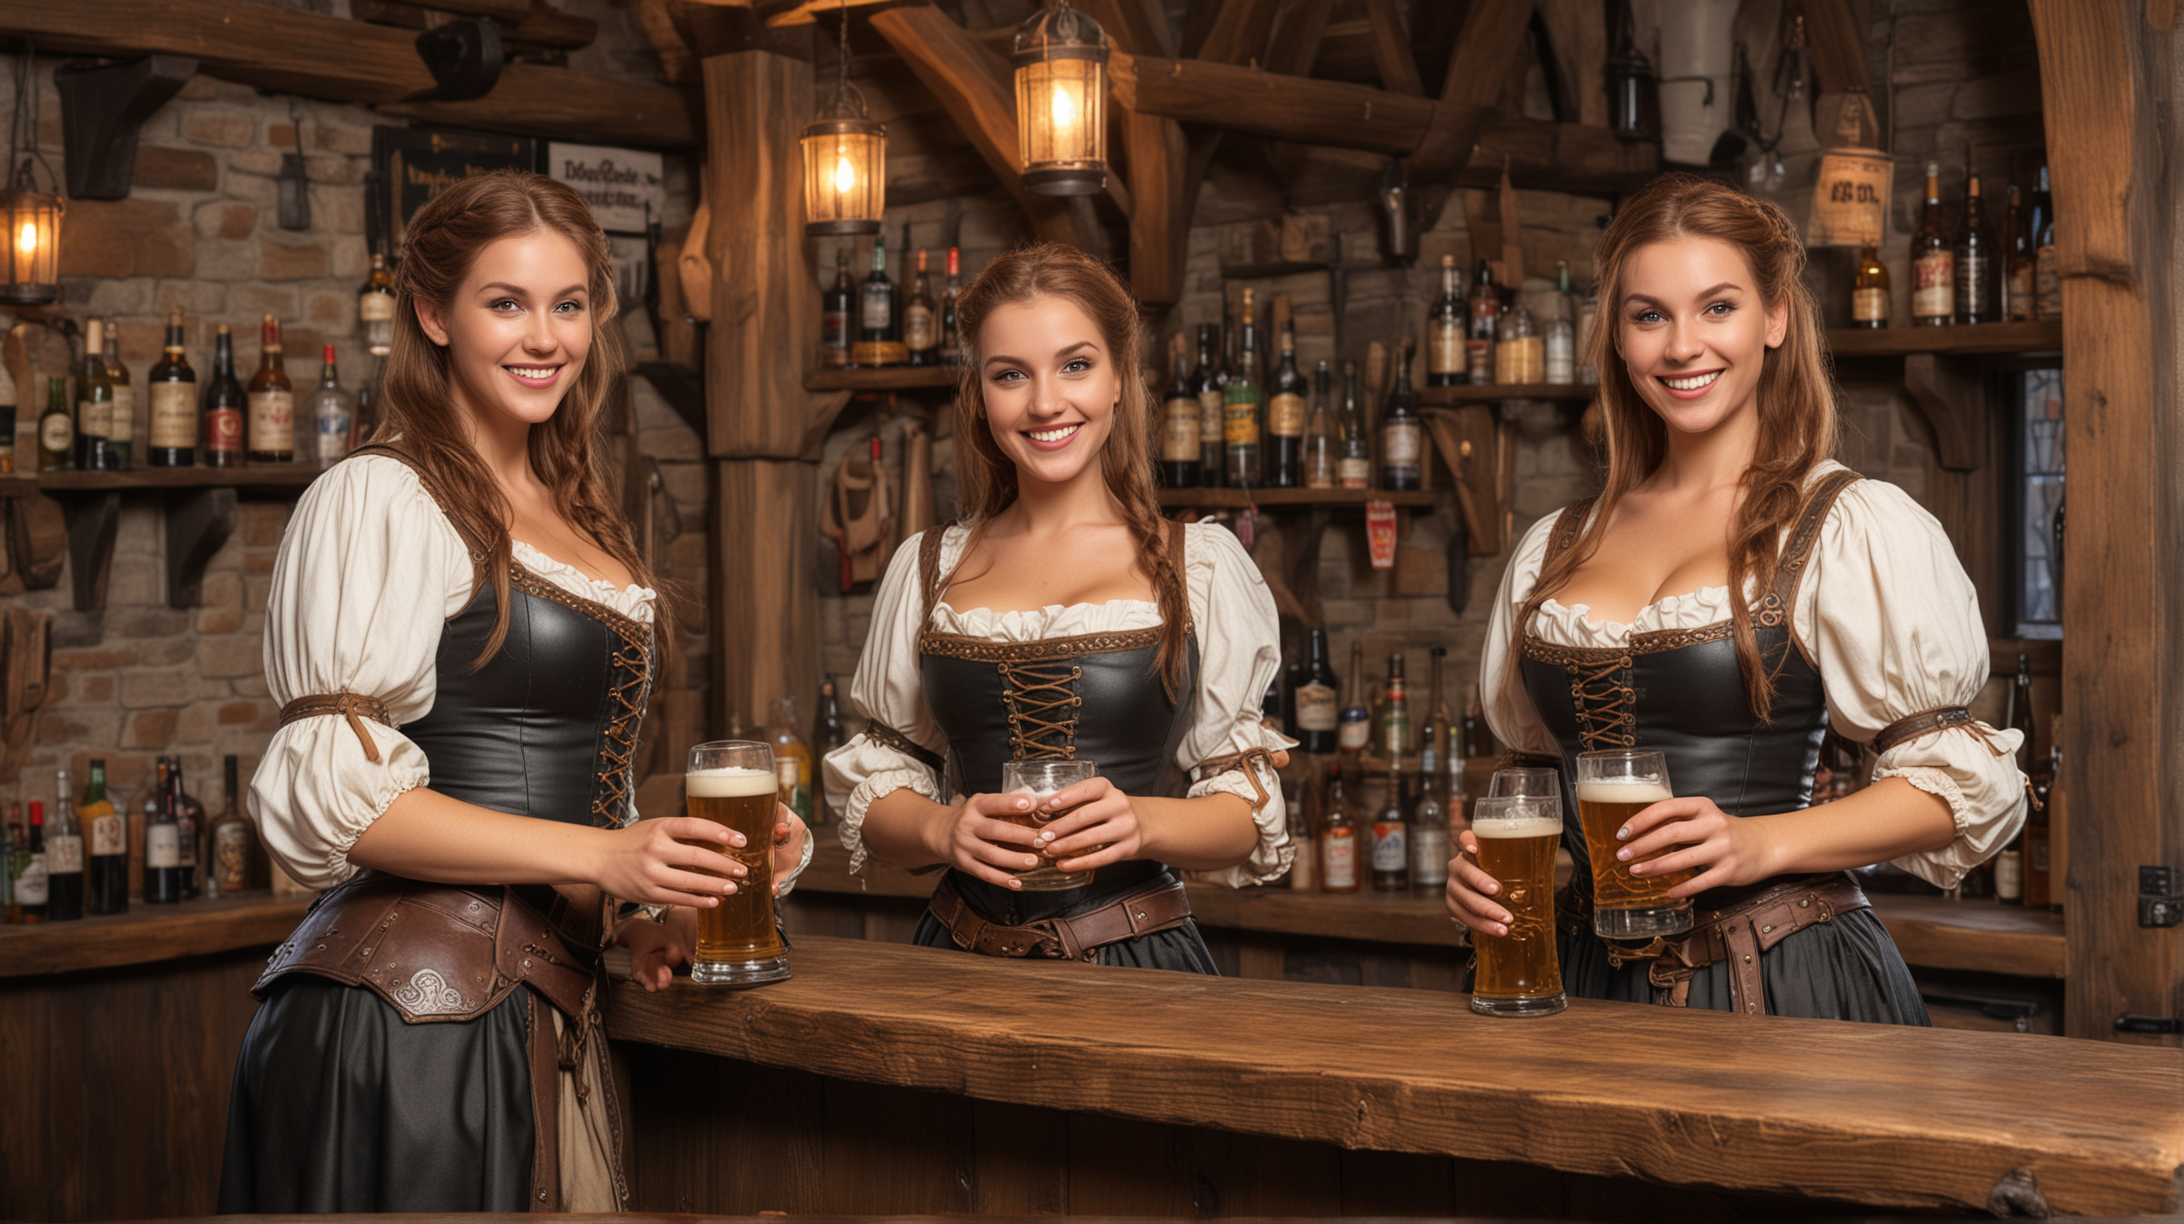 Medieval Bar Scene with Two Cheerful Bar Wenches Serving Beer to Adventurers